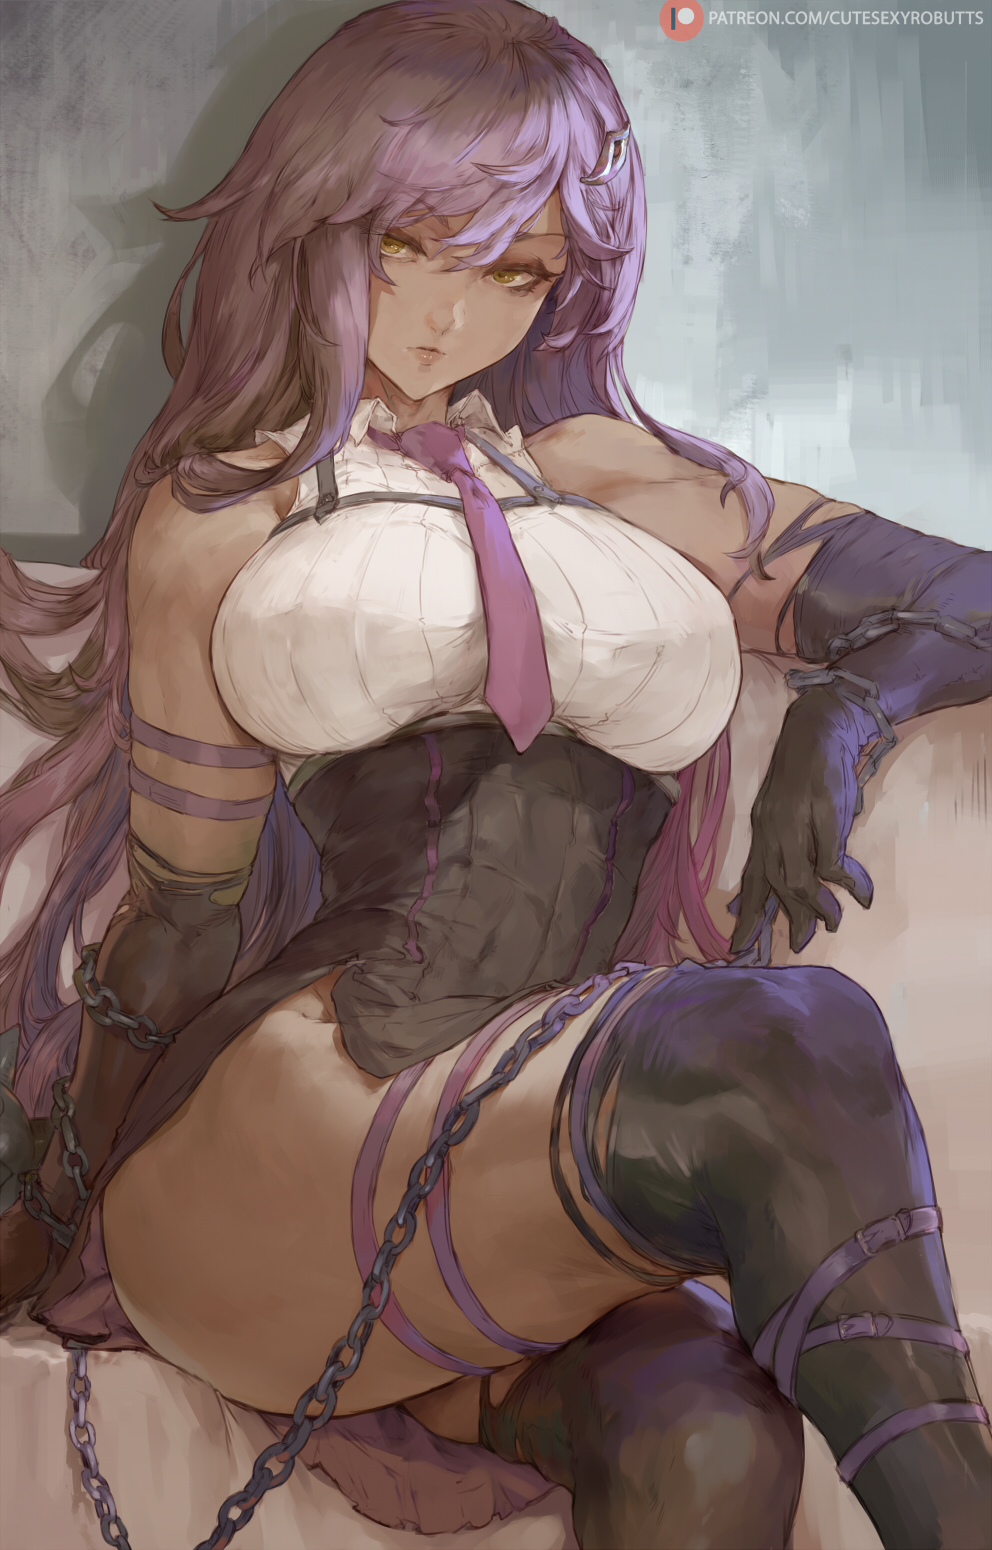 1girl bangs bare_shoulders breasts chain crossed_legs cutesexyrobutts elbow_gloves gloves highres large_breasts long_hair looking_at_viewer necktie original patreon_logo patreon_username purple_gloves purple_hair purple_necktie side_slit sitting strap thick_thighs thigh-highs thighs yellow_eyes